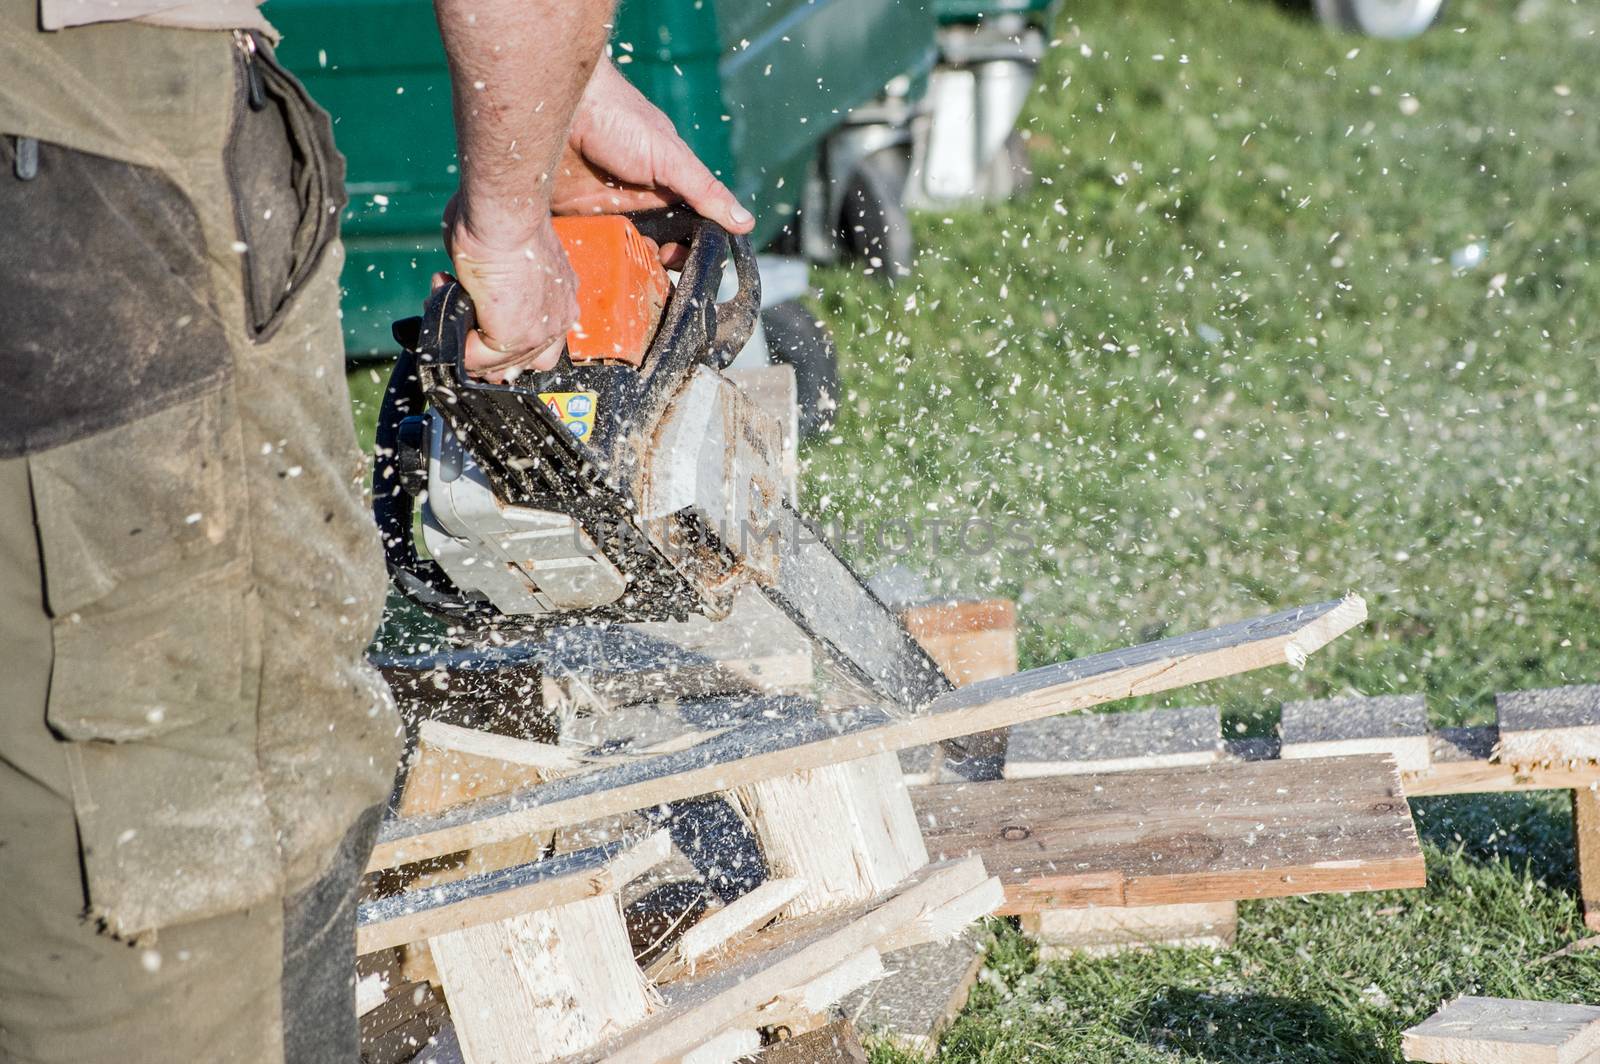 Man using a chainsaw to cut pallets by BasPhoto